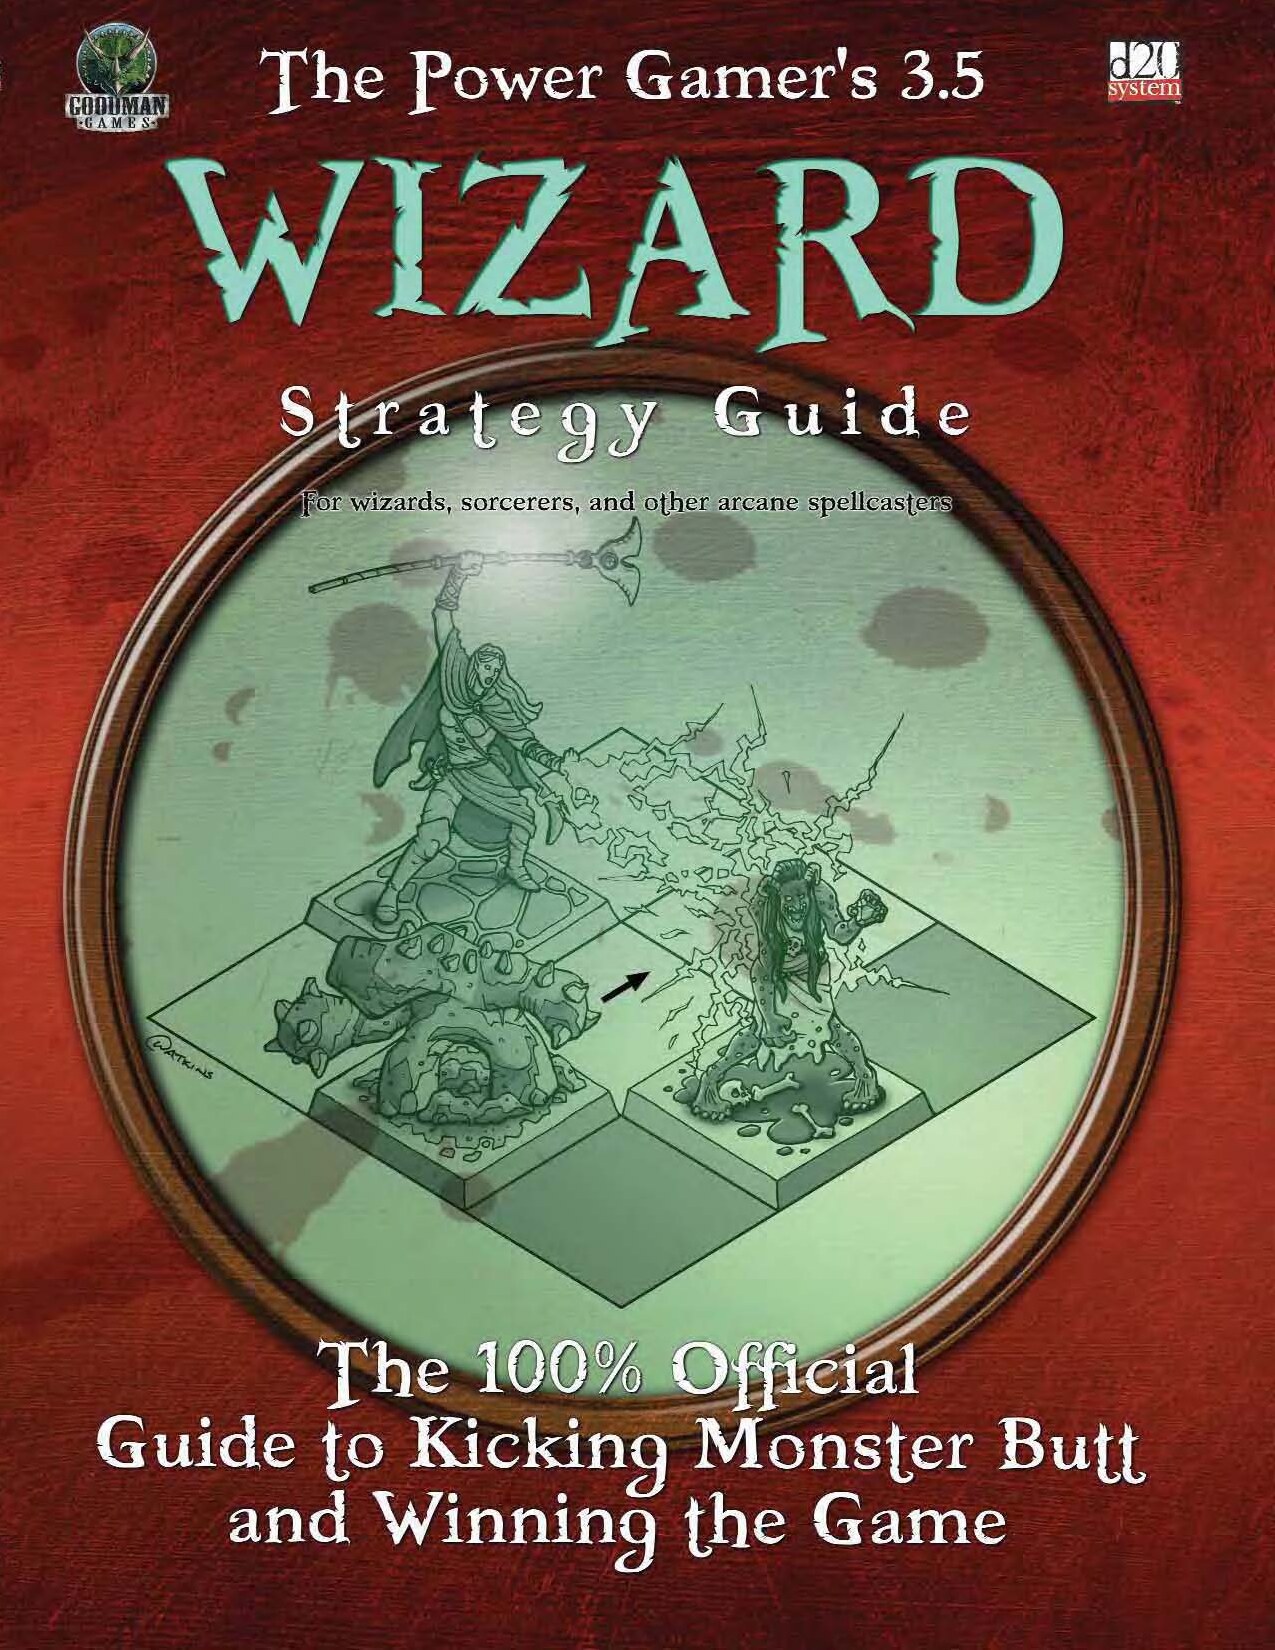 Power Gamer's 3.5 Wizard Strategy Guide